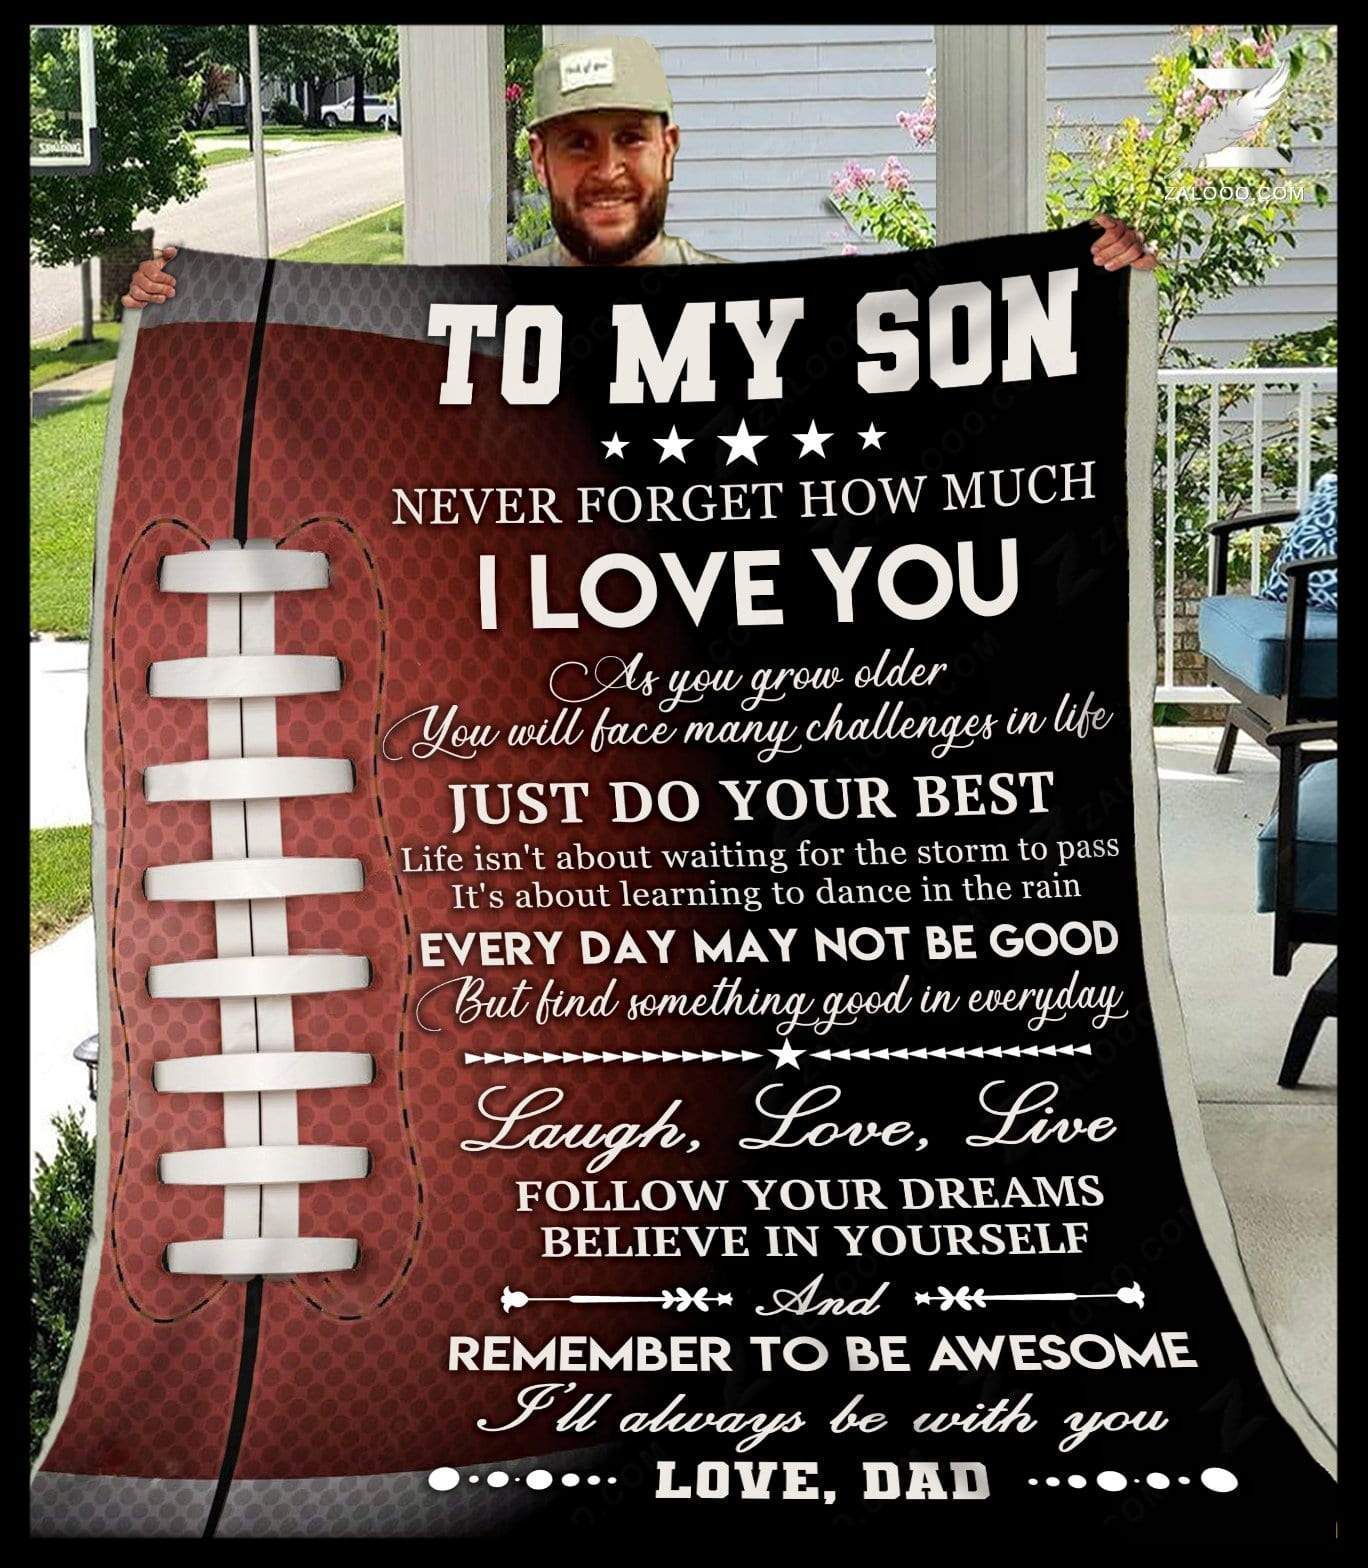 Details about   TO MY SON NEVER FORGET  3D CUSTOM SHERPA FLEECE PHOTO BLANKET FAN GIFT